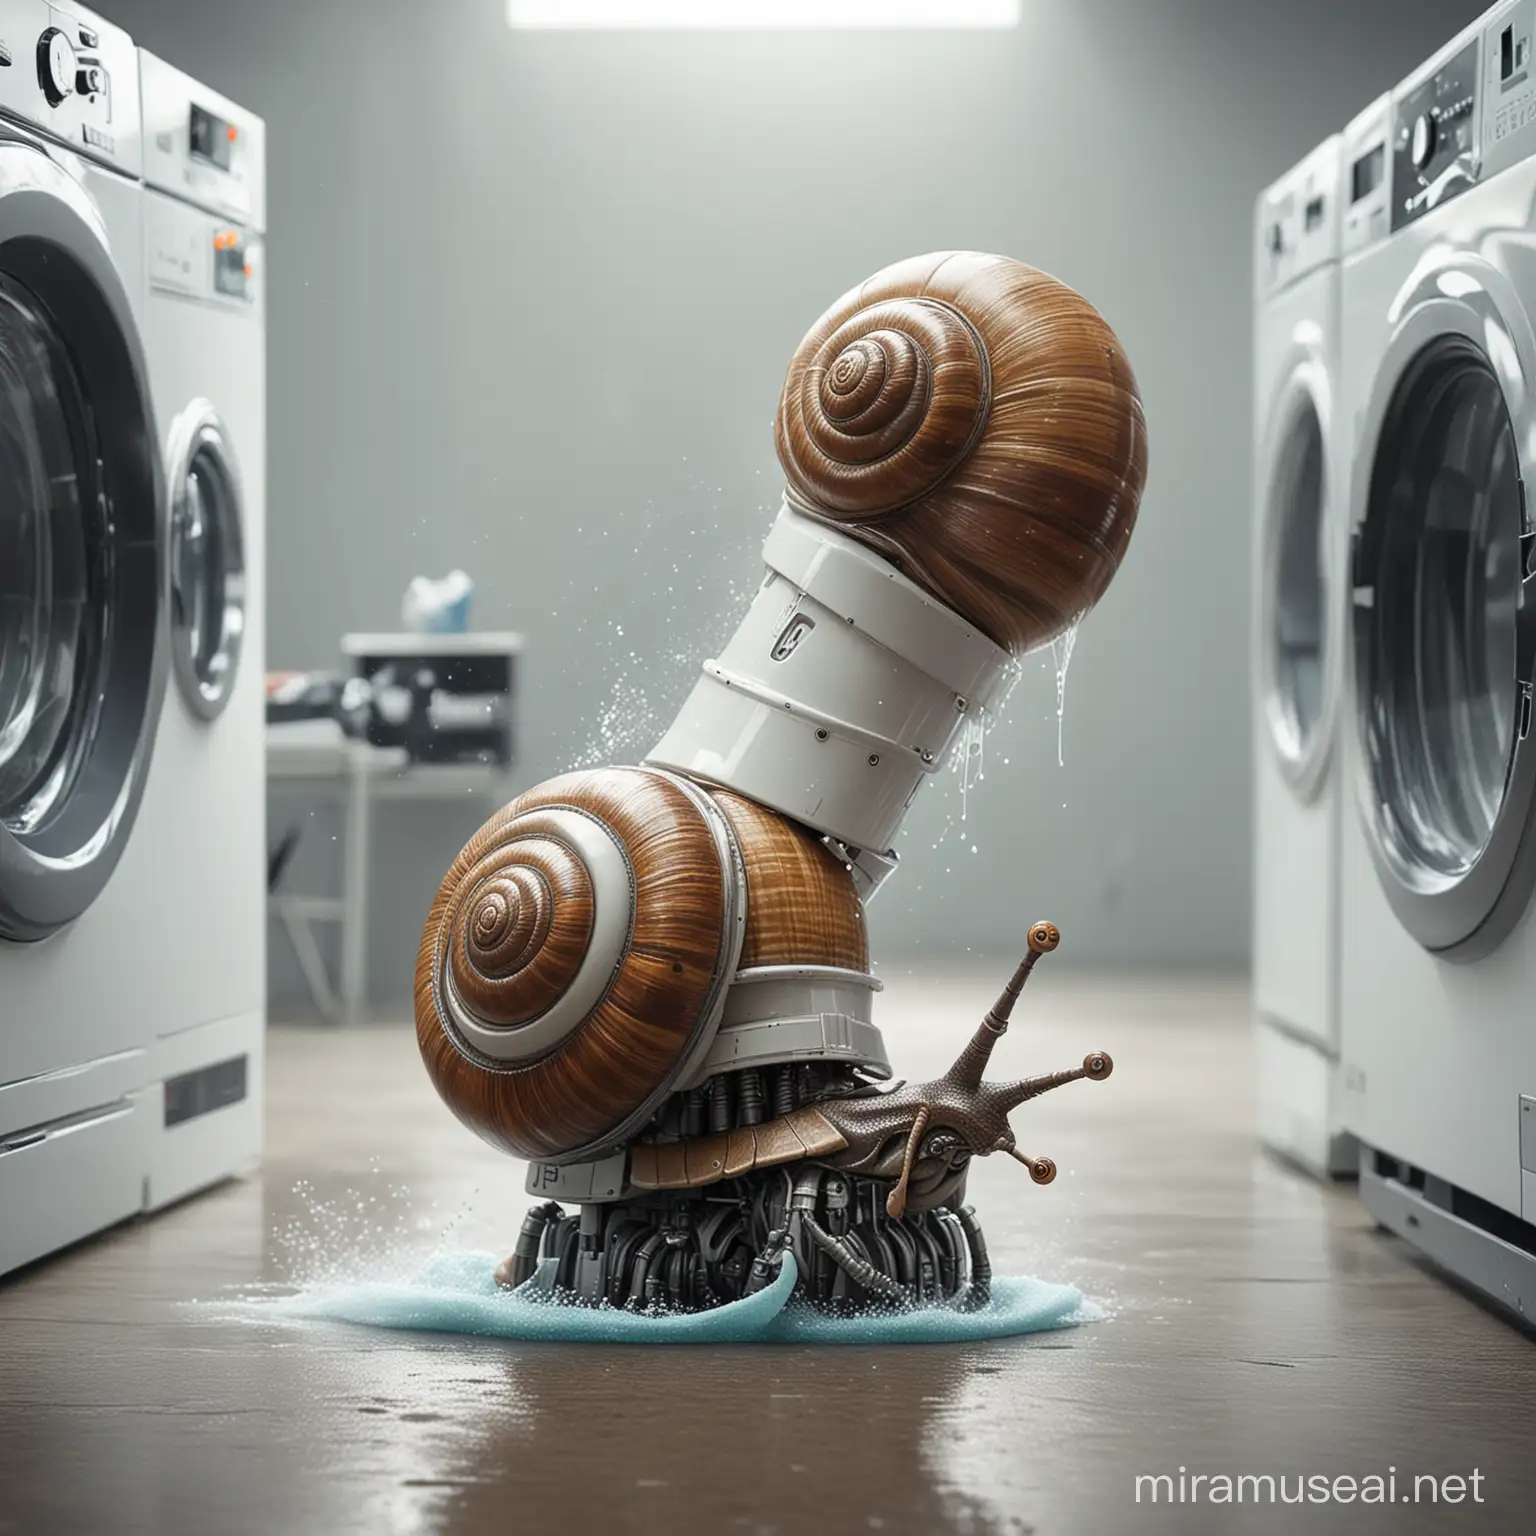 Robot Snail Operating Laundry Cleaning Services